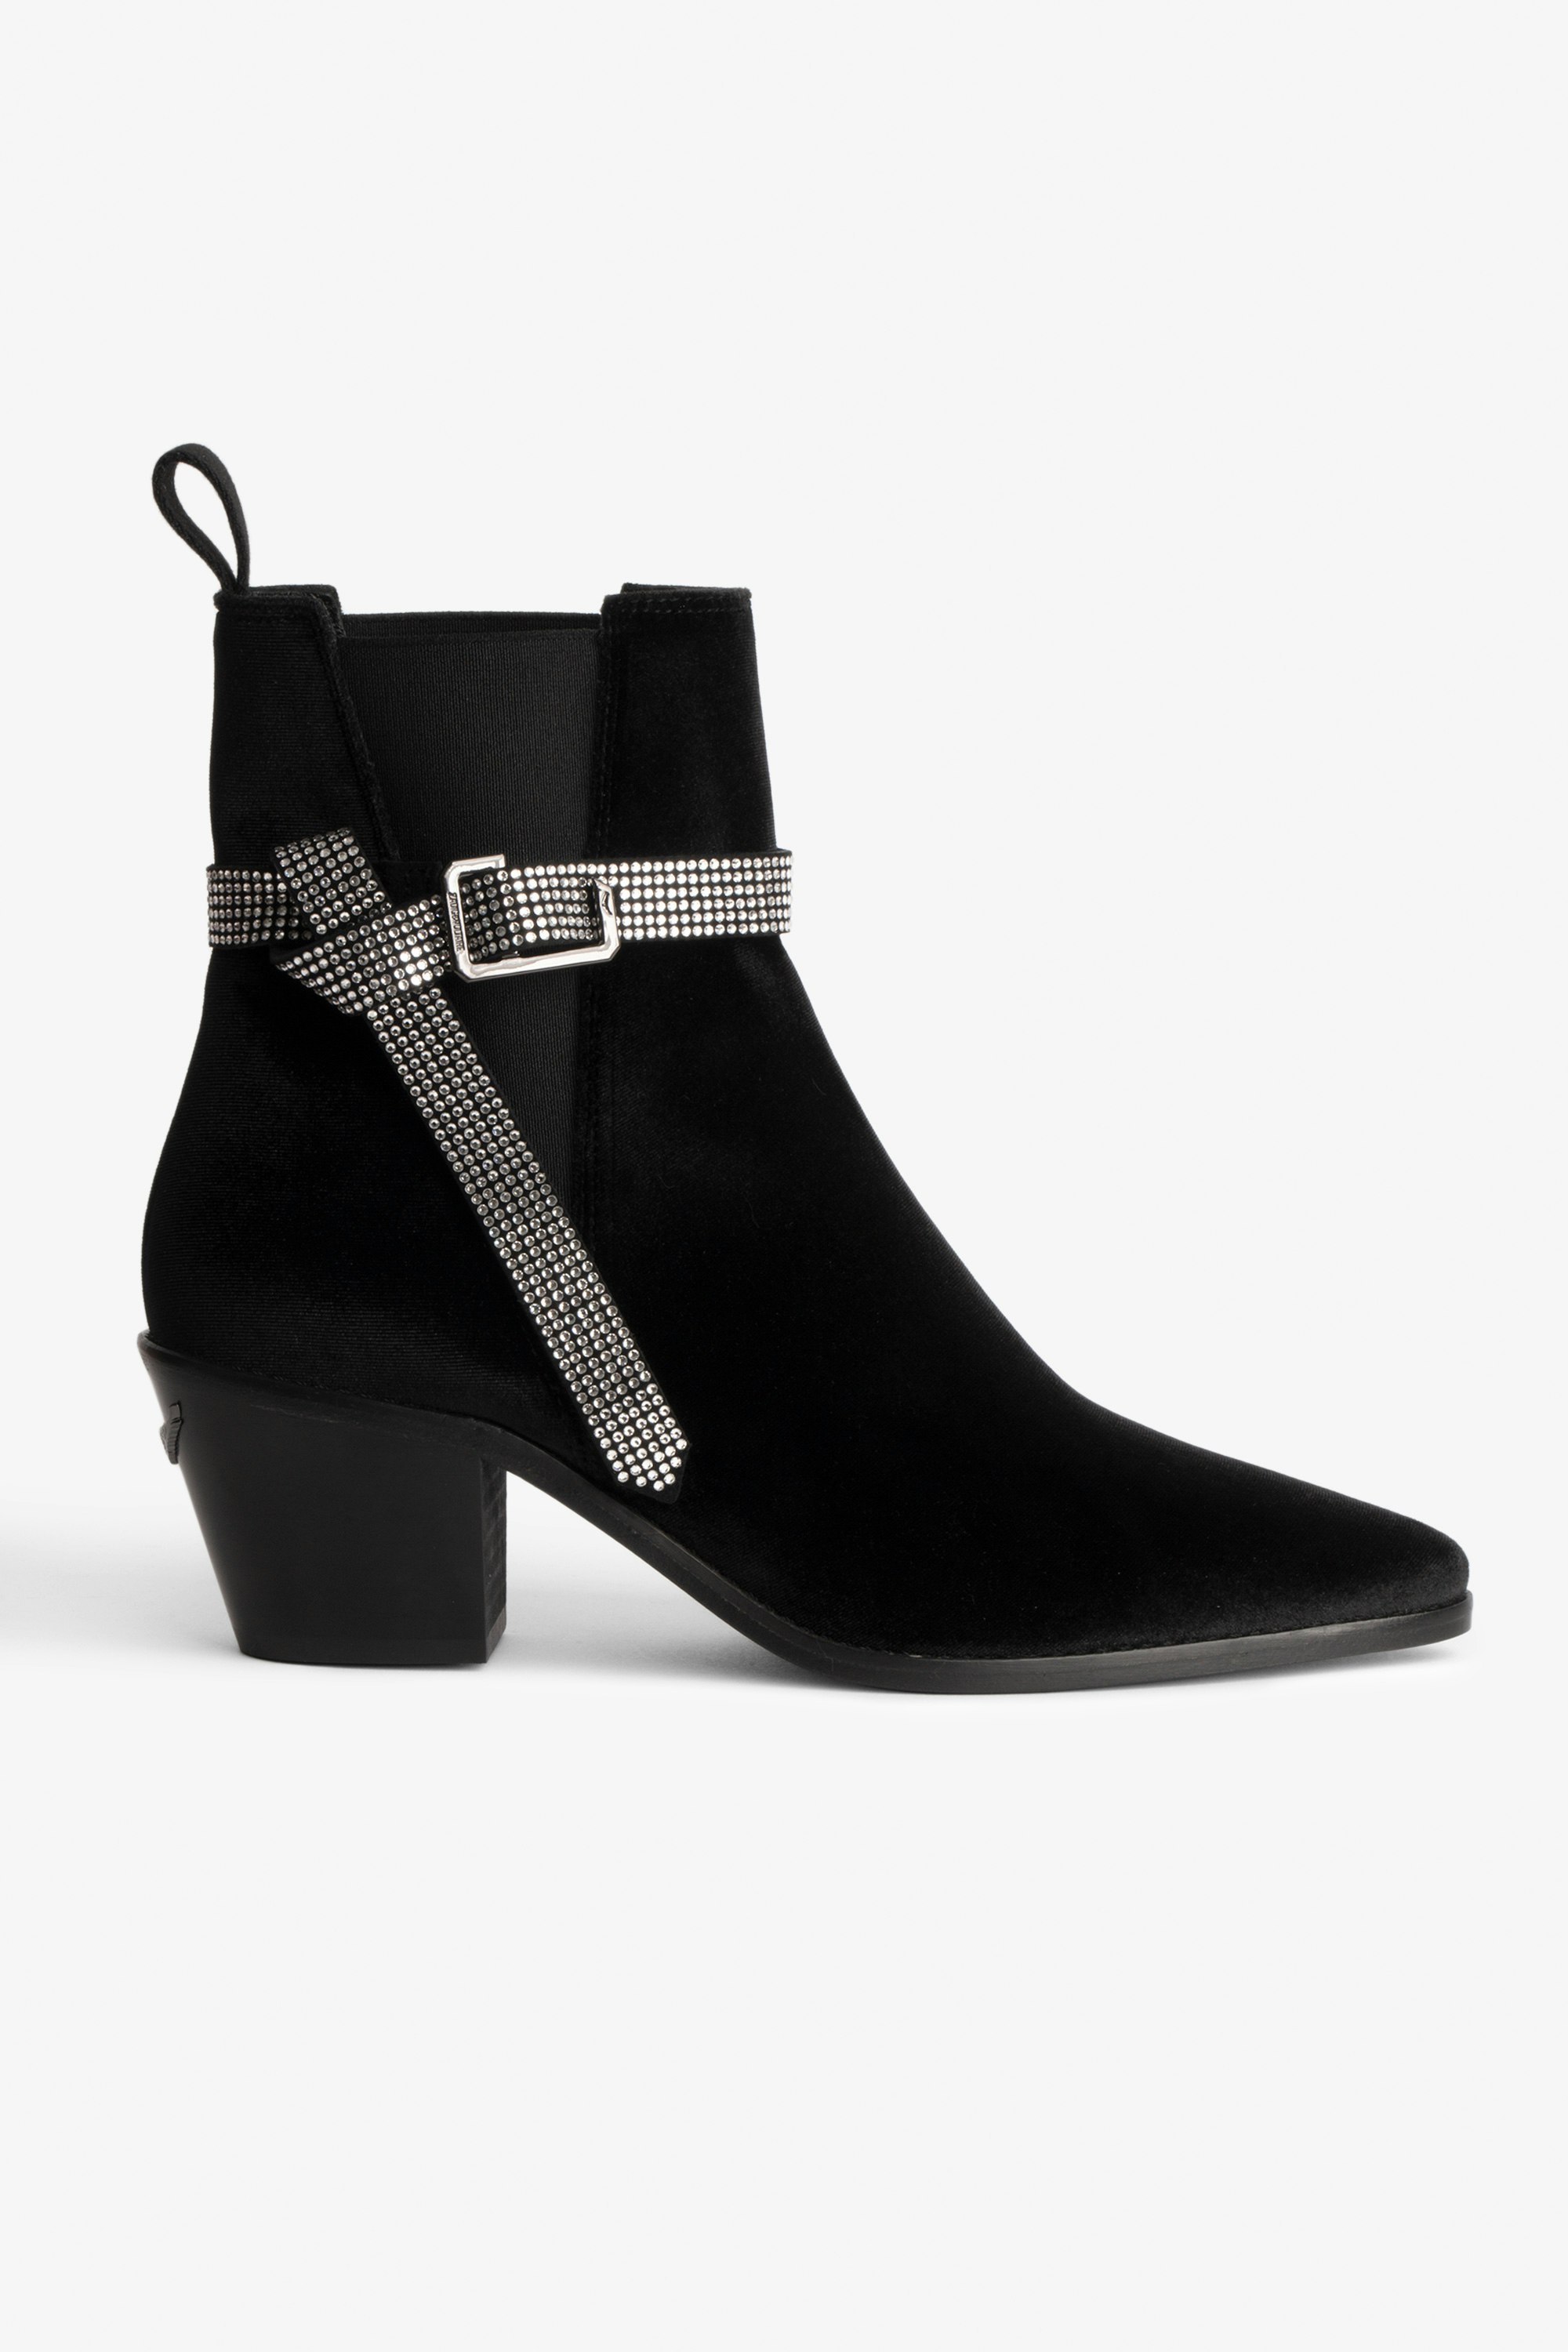 Tyler Ankle Boots Women’s black suede ankle boots with Swarovski® rhinestones.